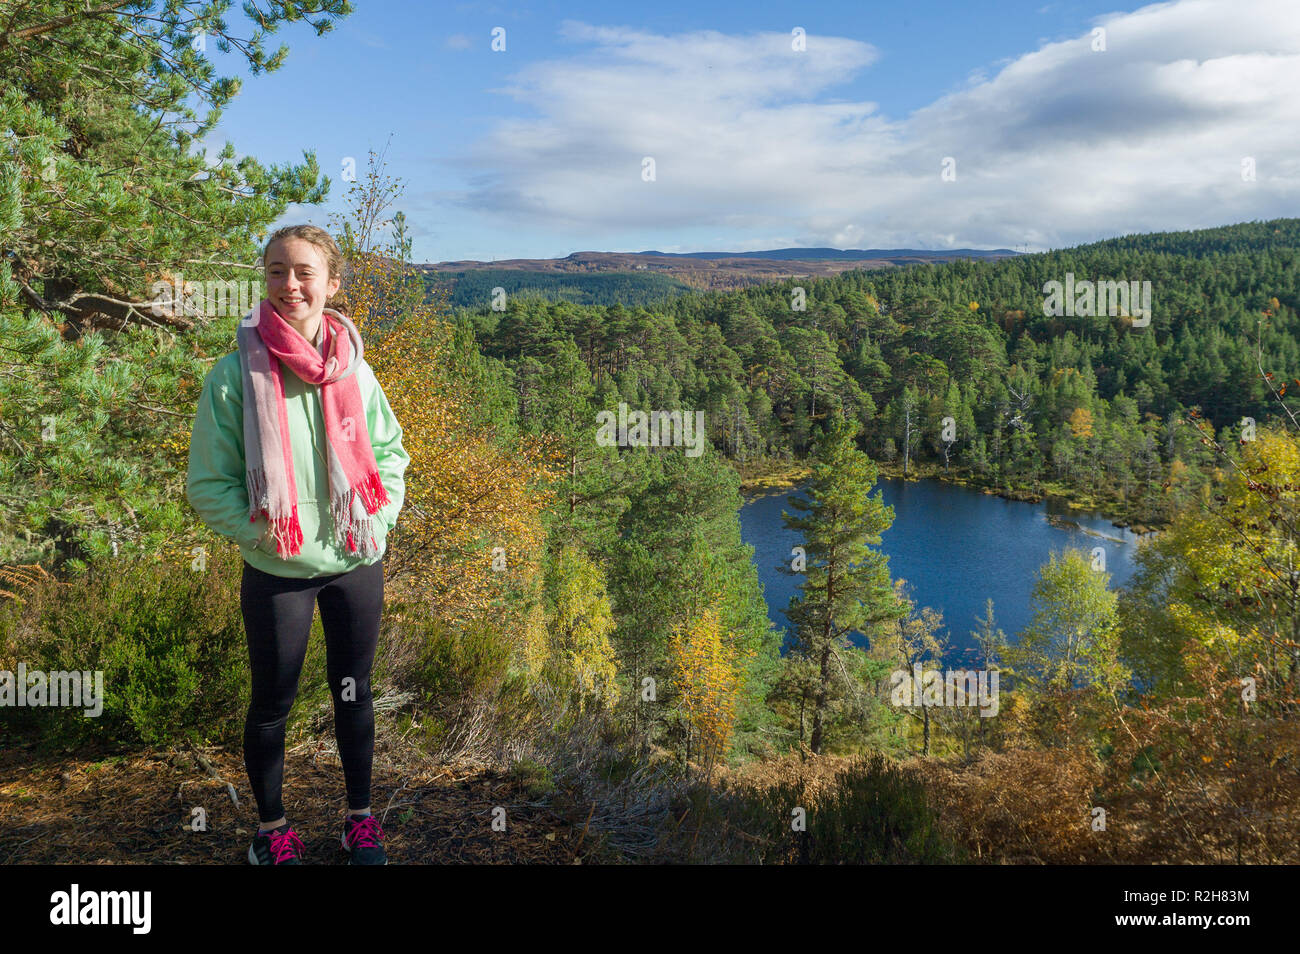 Coire loch on the viewpoint trail in Glen Affric, Highlands, Scotland. Stock Photo